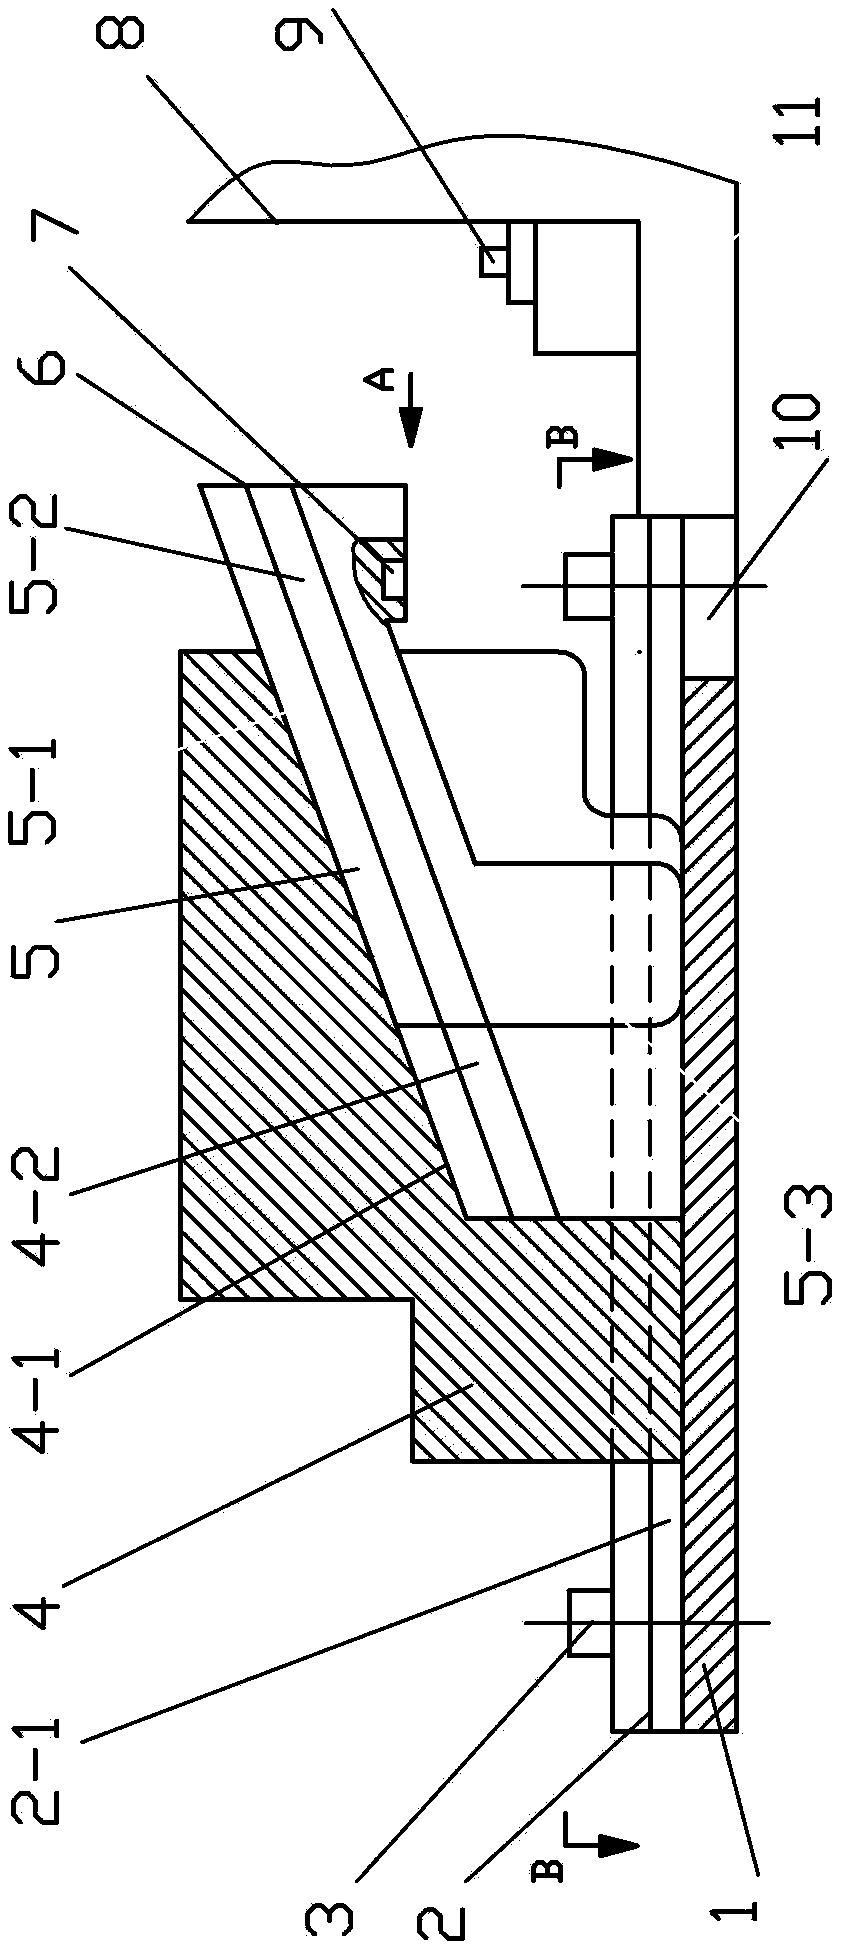 Two-stage sliding block device for die